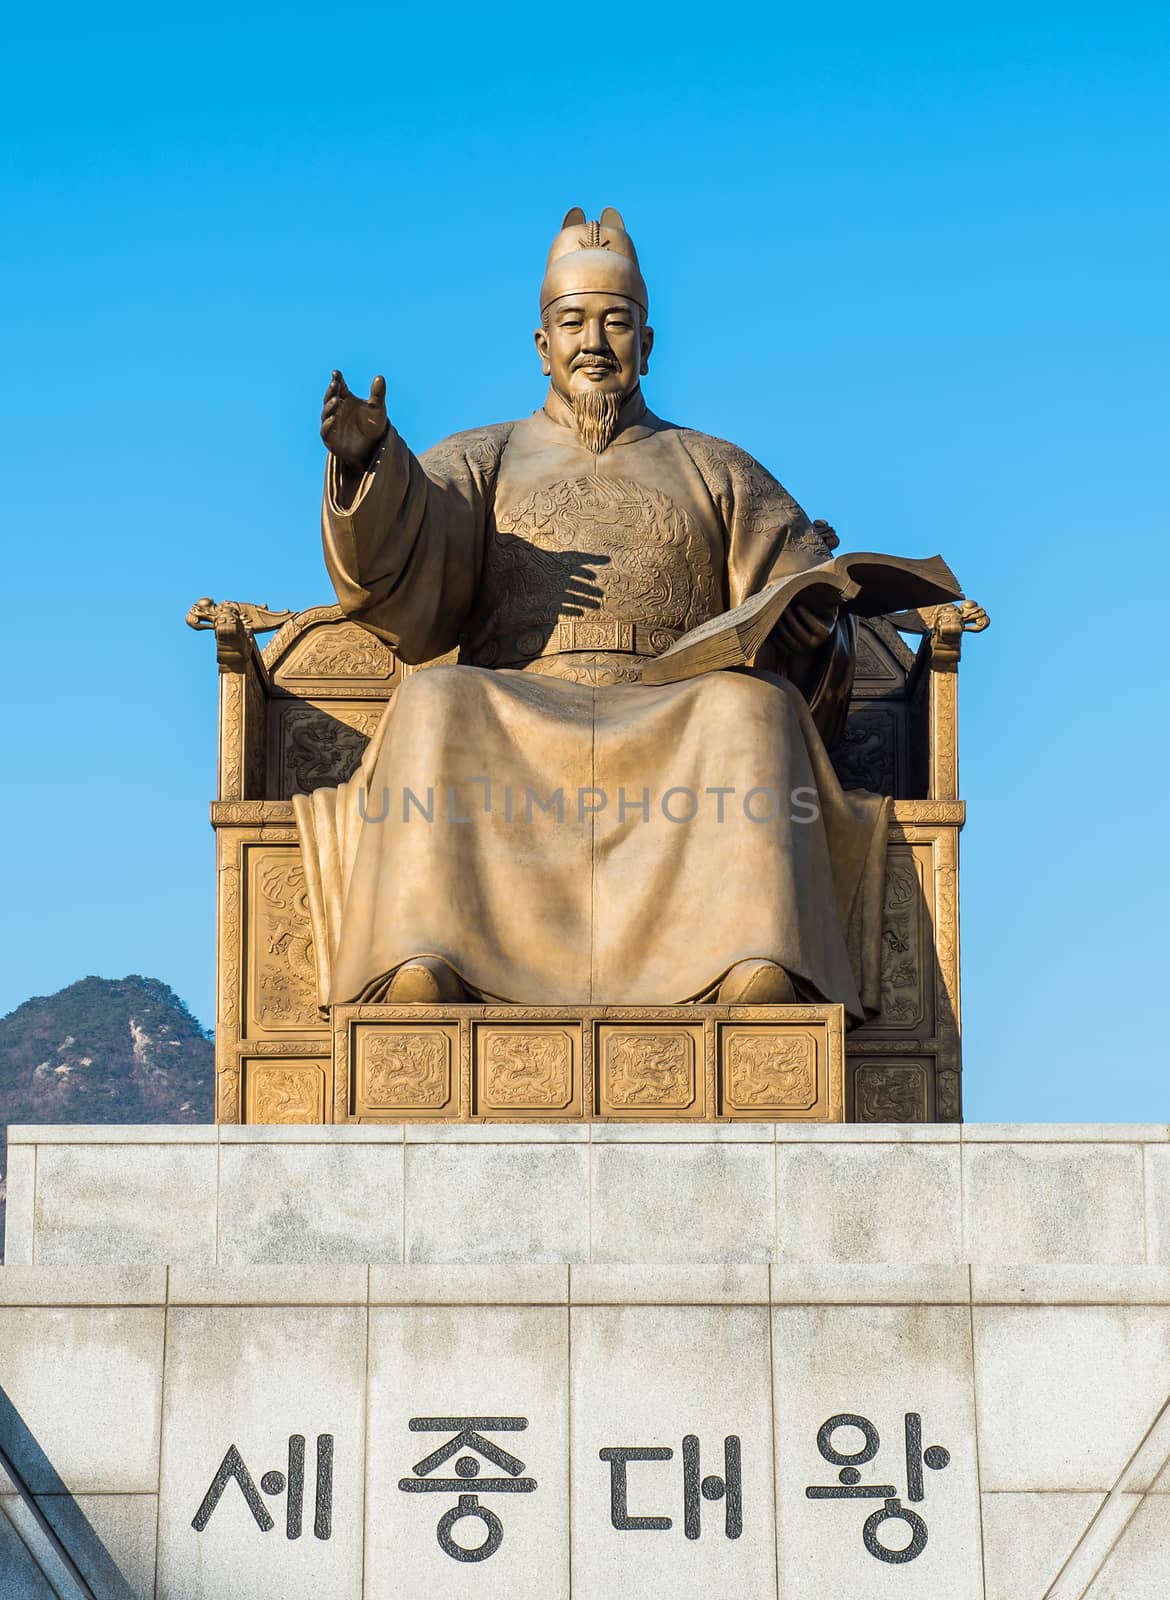 Statue of Sejong the great, King of South Korea. by gutarphotoghaphy